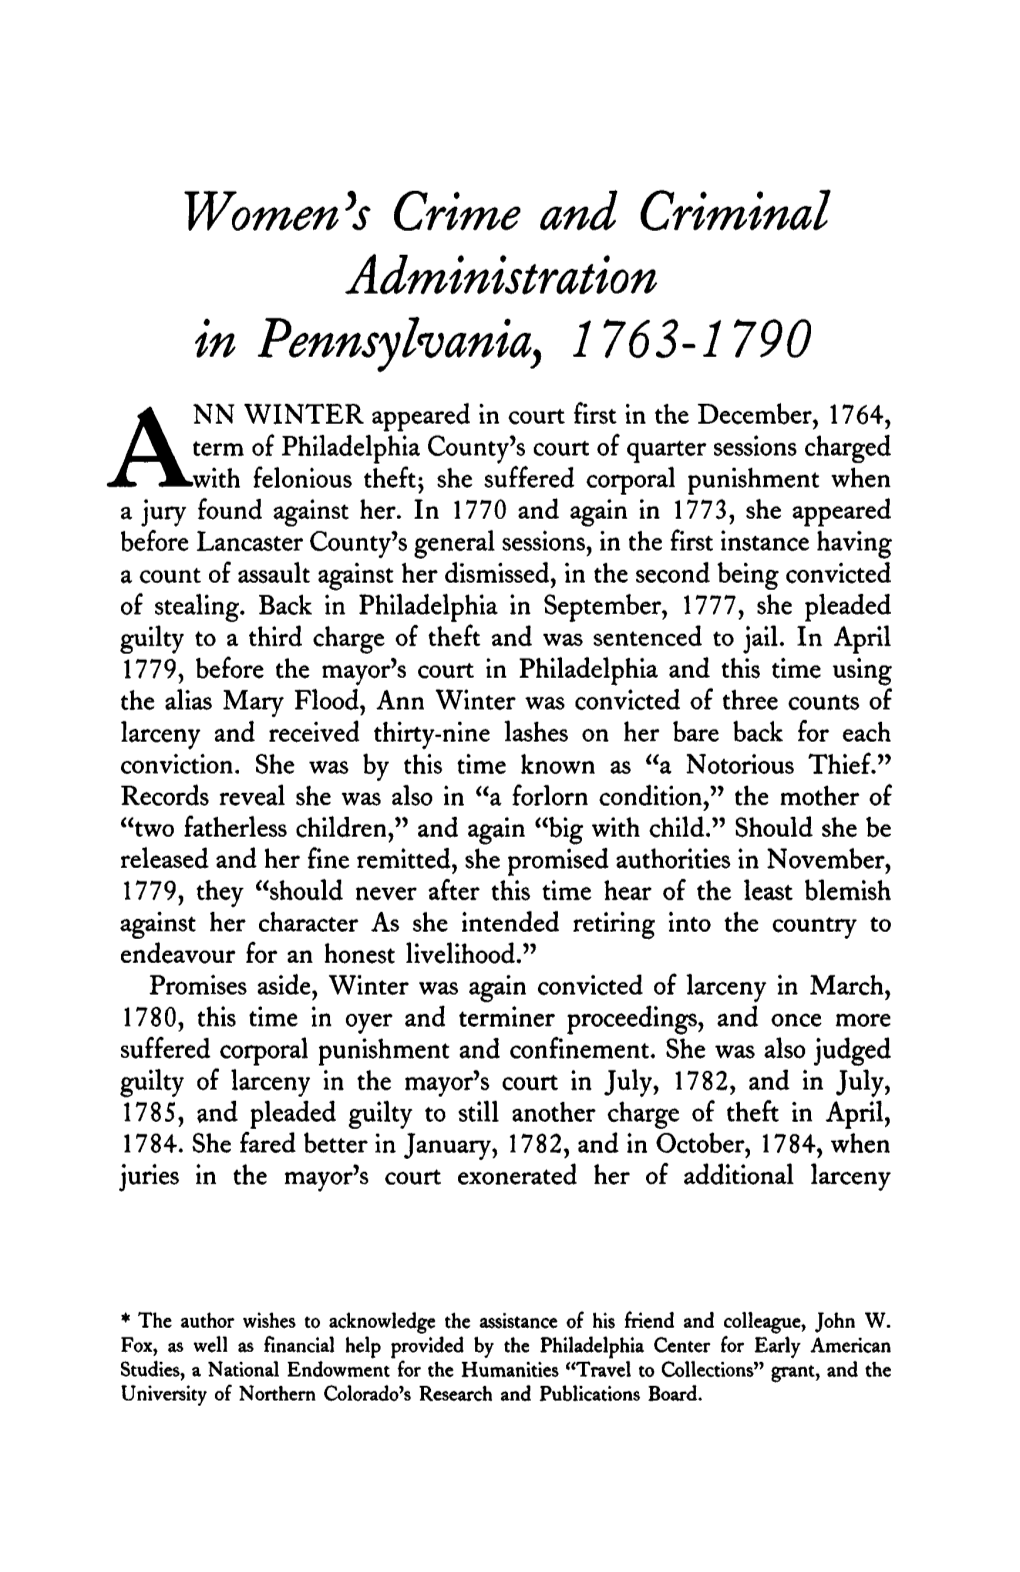 Women's Crime and Criminal Administration in Pennsylvania, 1763-1790